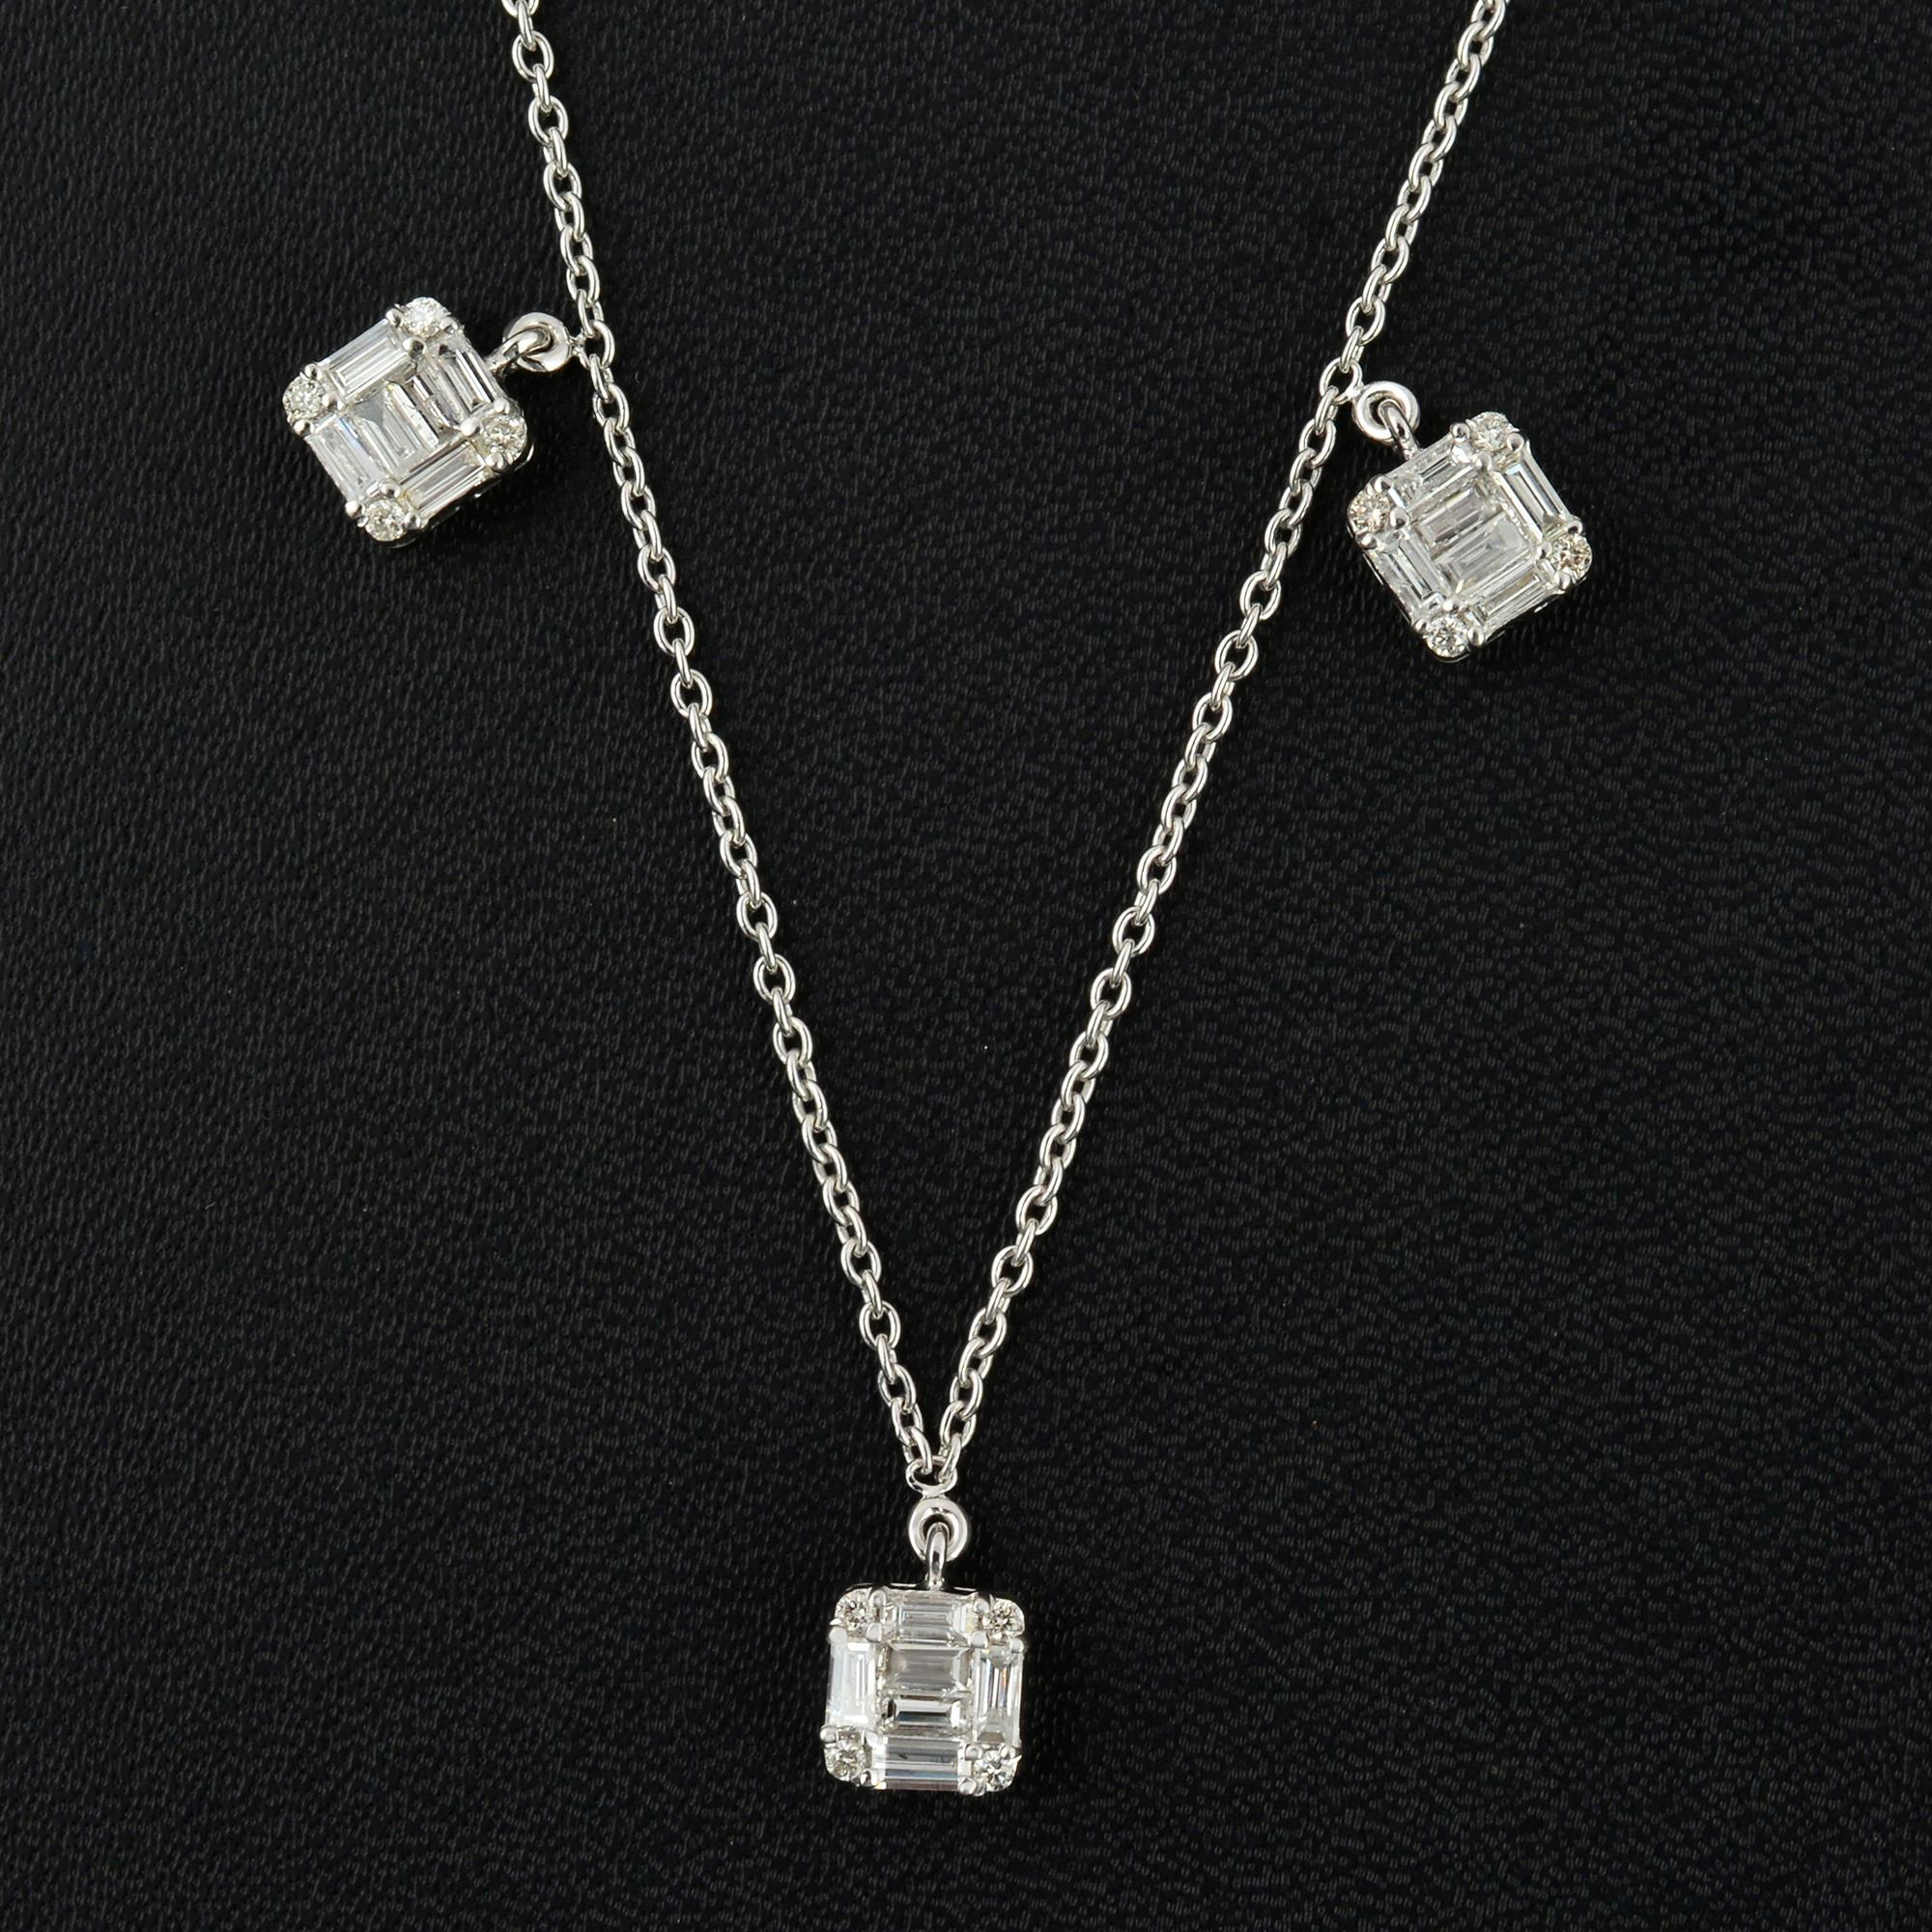 Elevate your jewelry collection with this exquisite baguette diamond charm necklace. Crafted in 18-karat white gold, this fine jewelry piece features a stunning array of baguette-cut diamonds with a total weight of 1.4 carats, showcasing exceptional